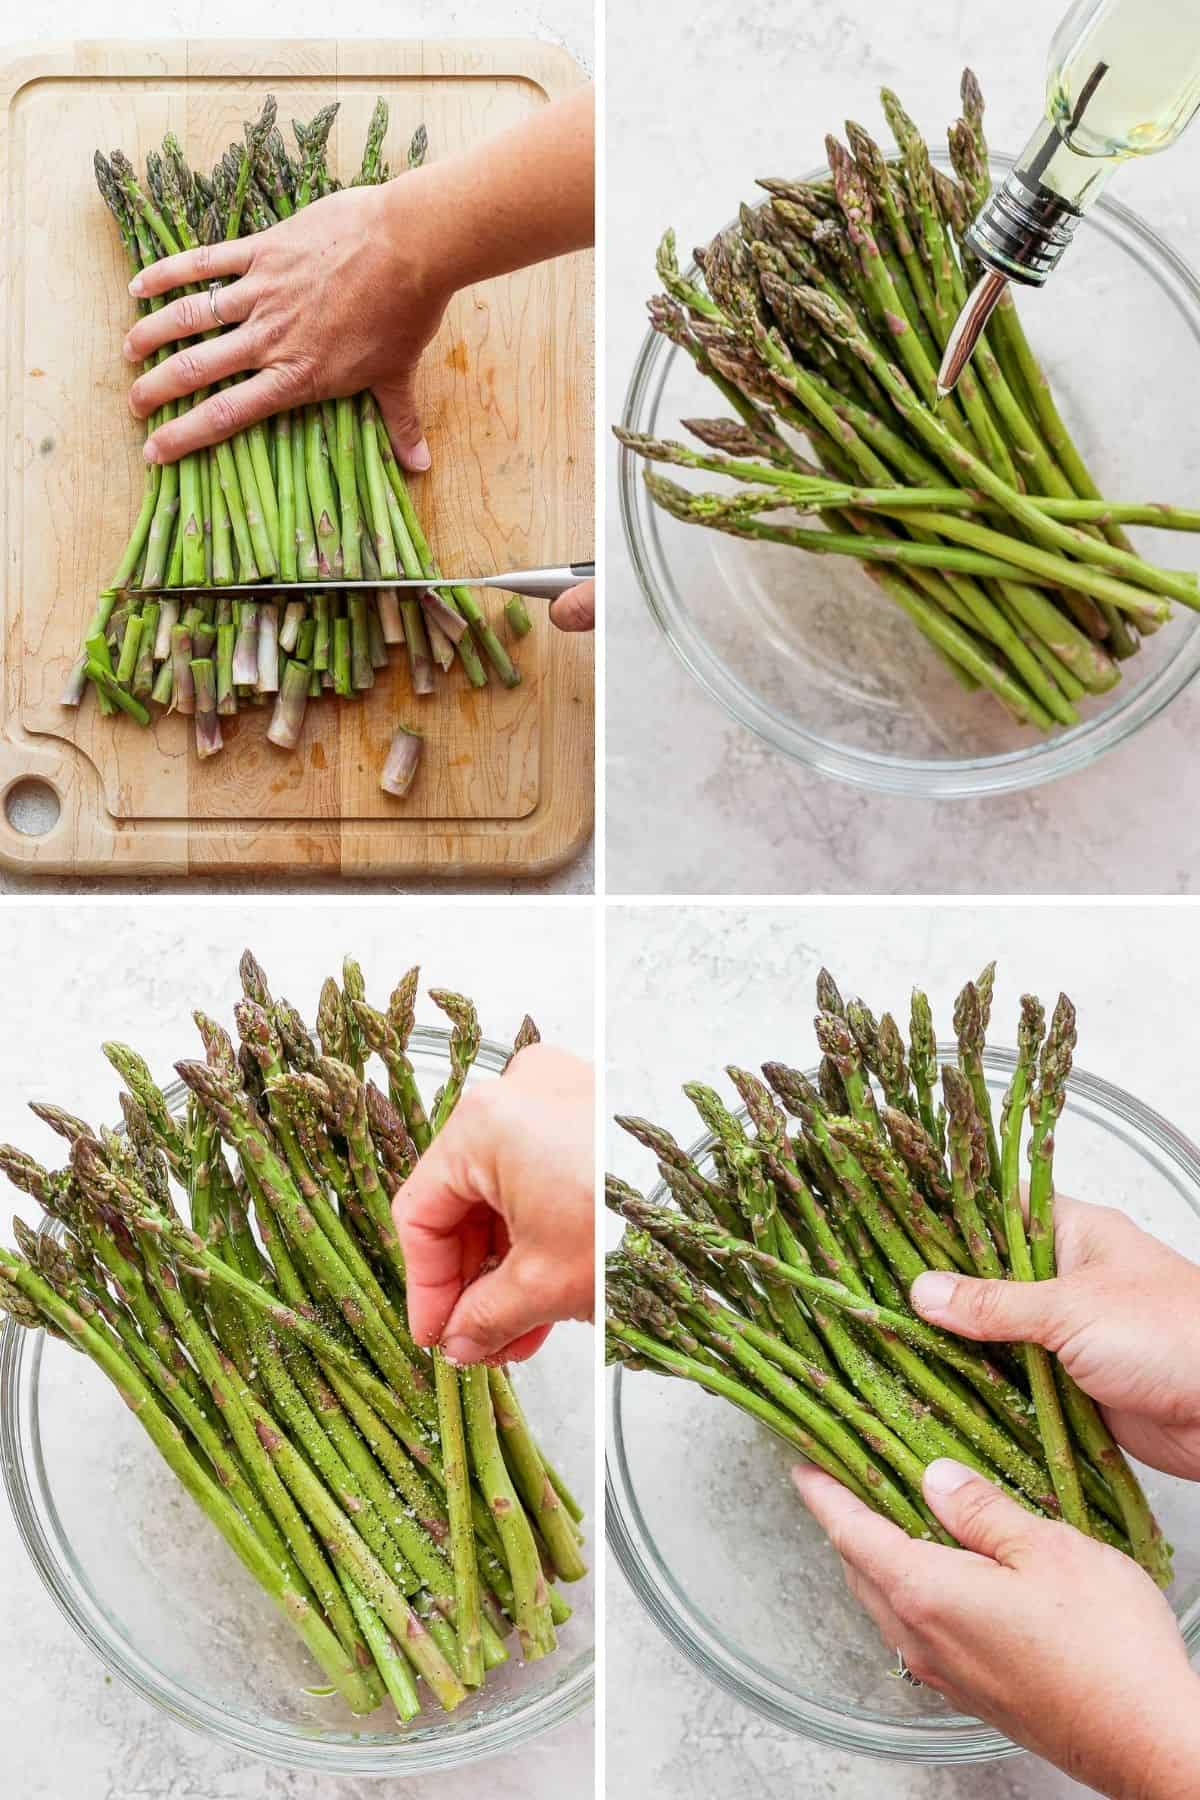 4 image collage to show how to prepare the asparagus but cutting it, seasoning it and tossing